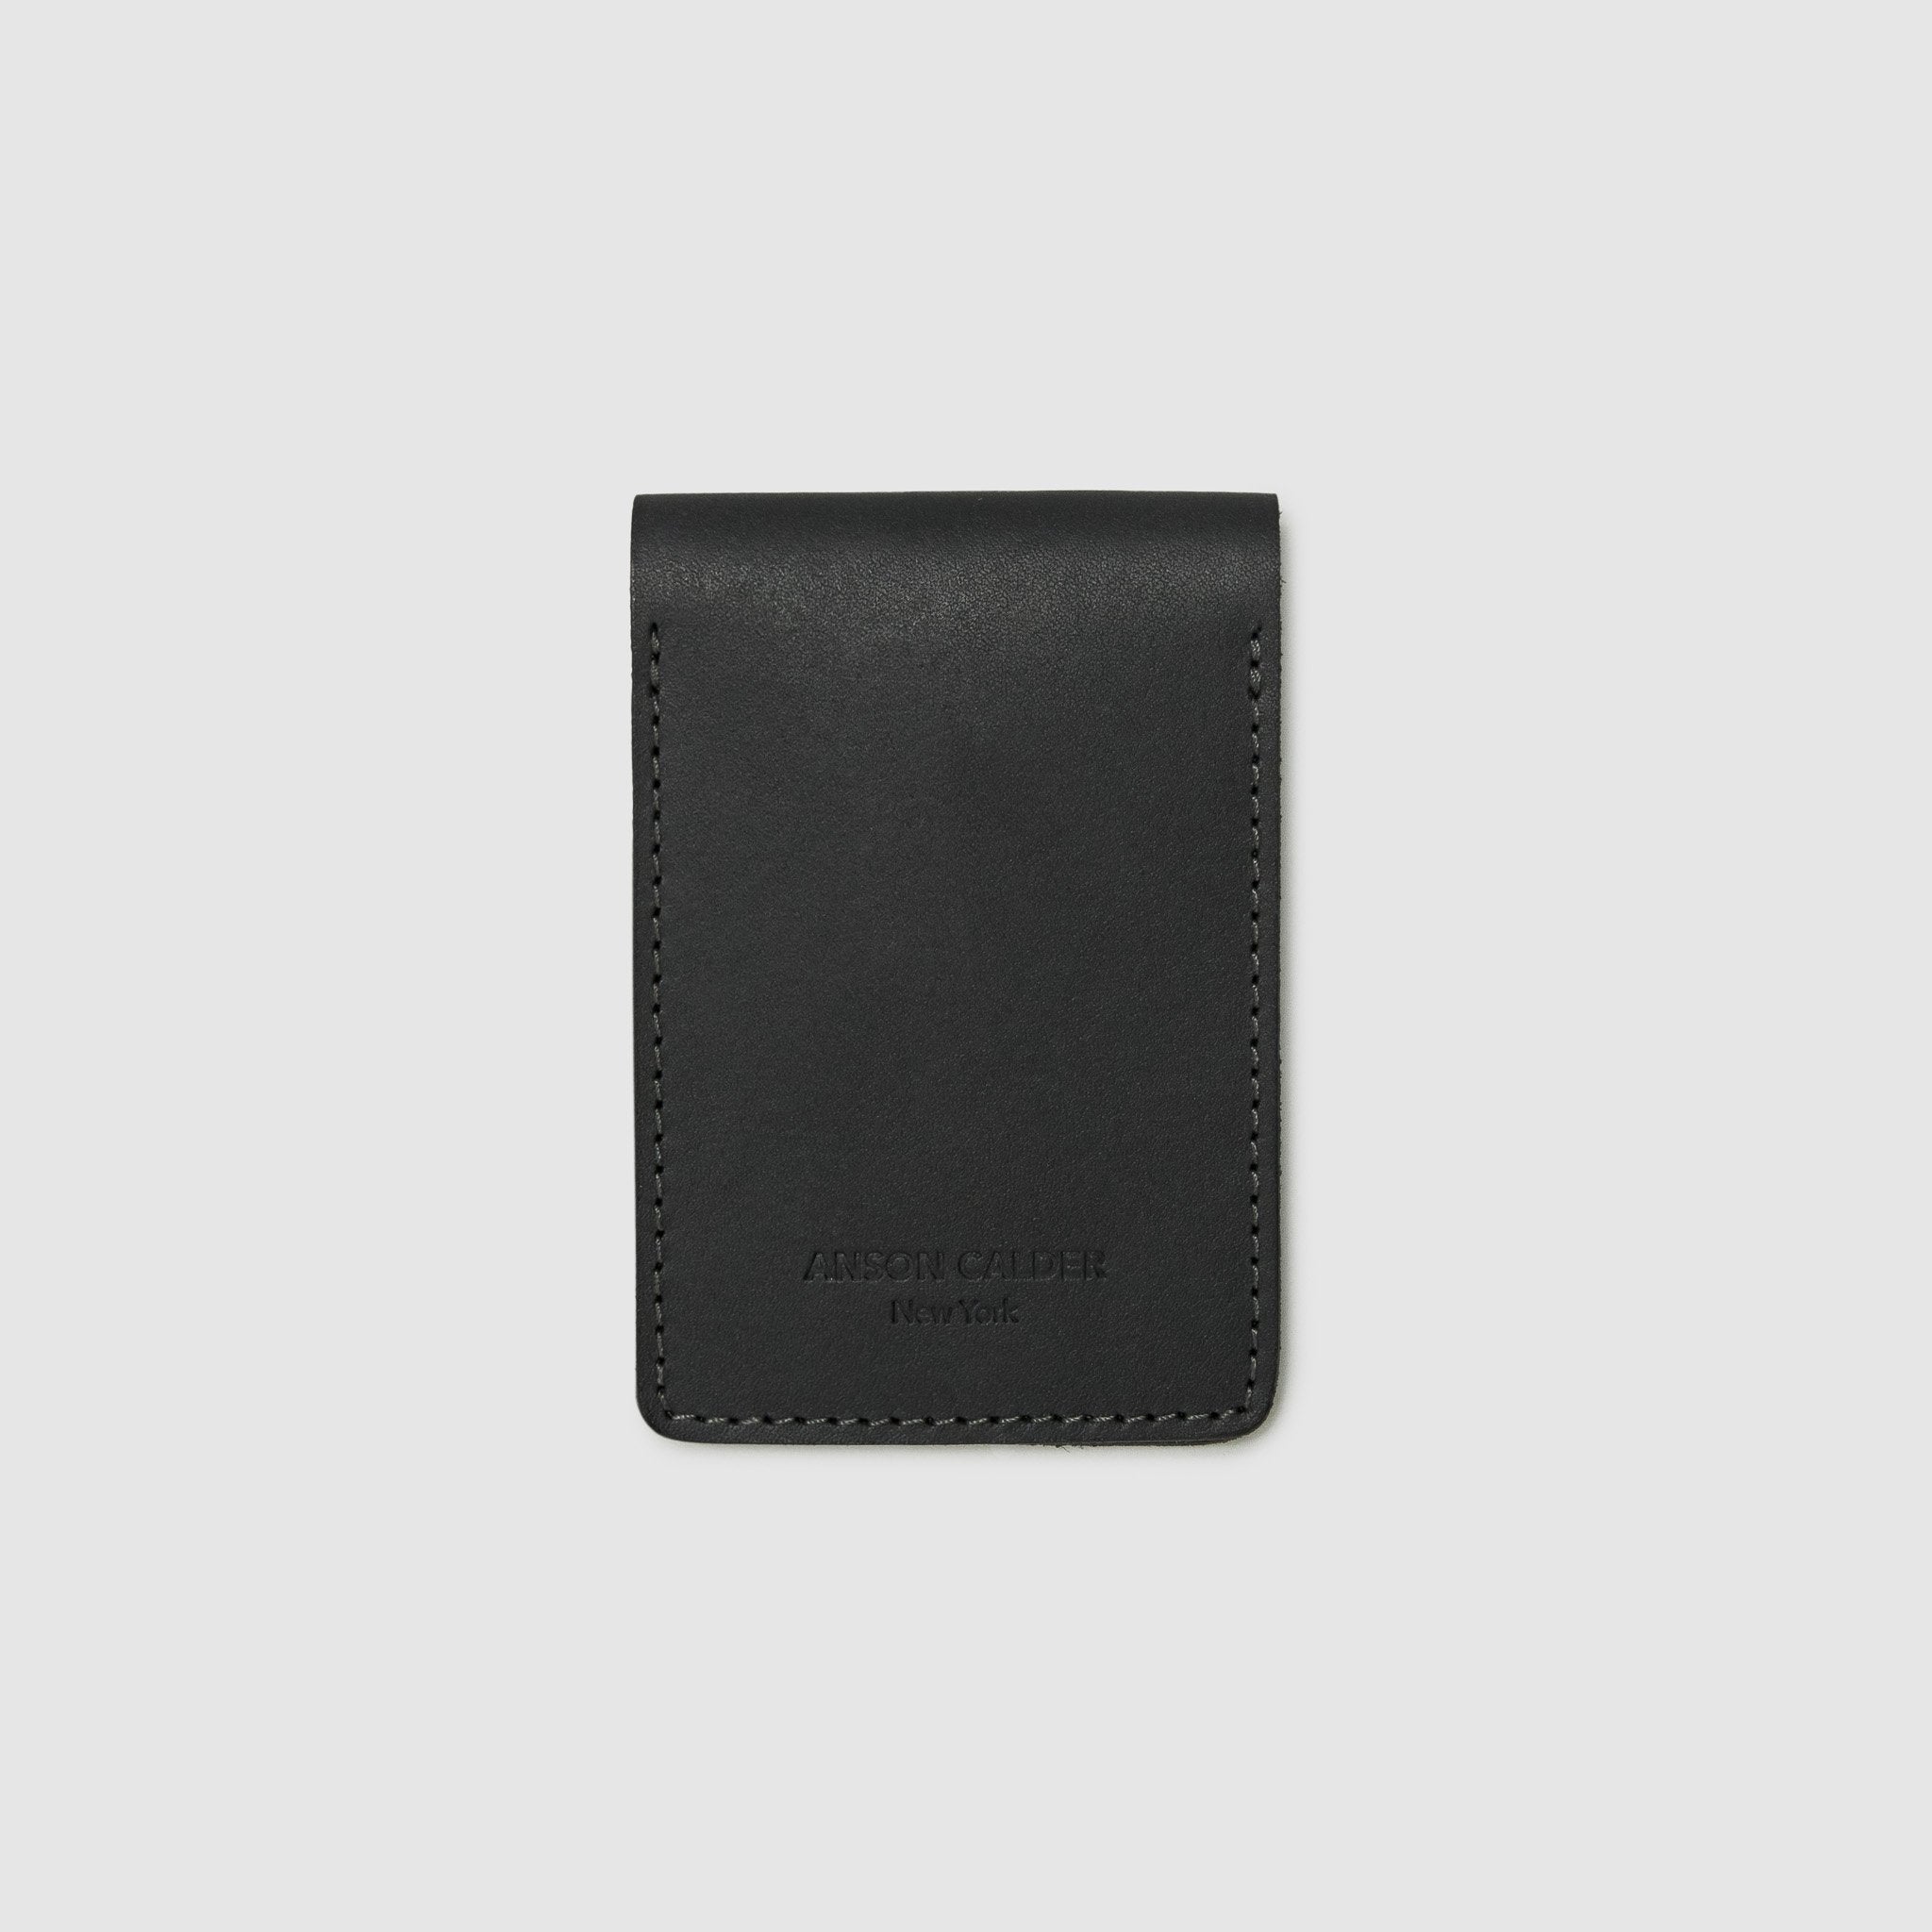 Anson Calder bifold Wallet with coin pocket RFID french calfskin leather _black